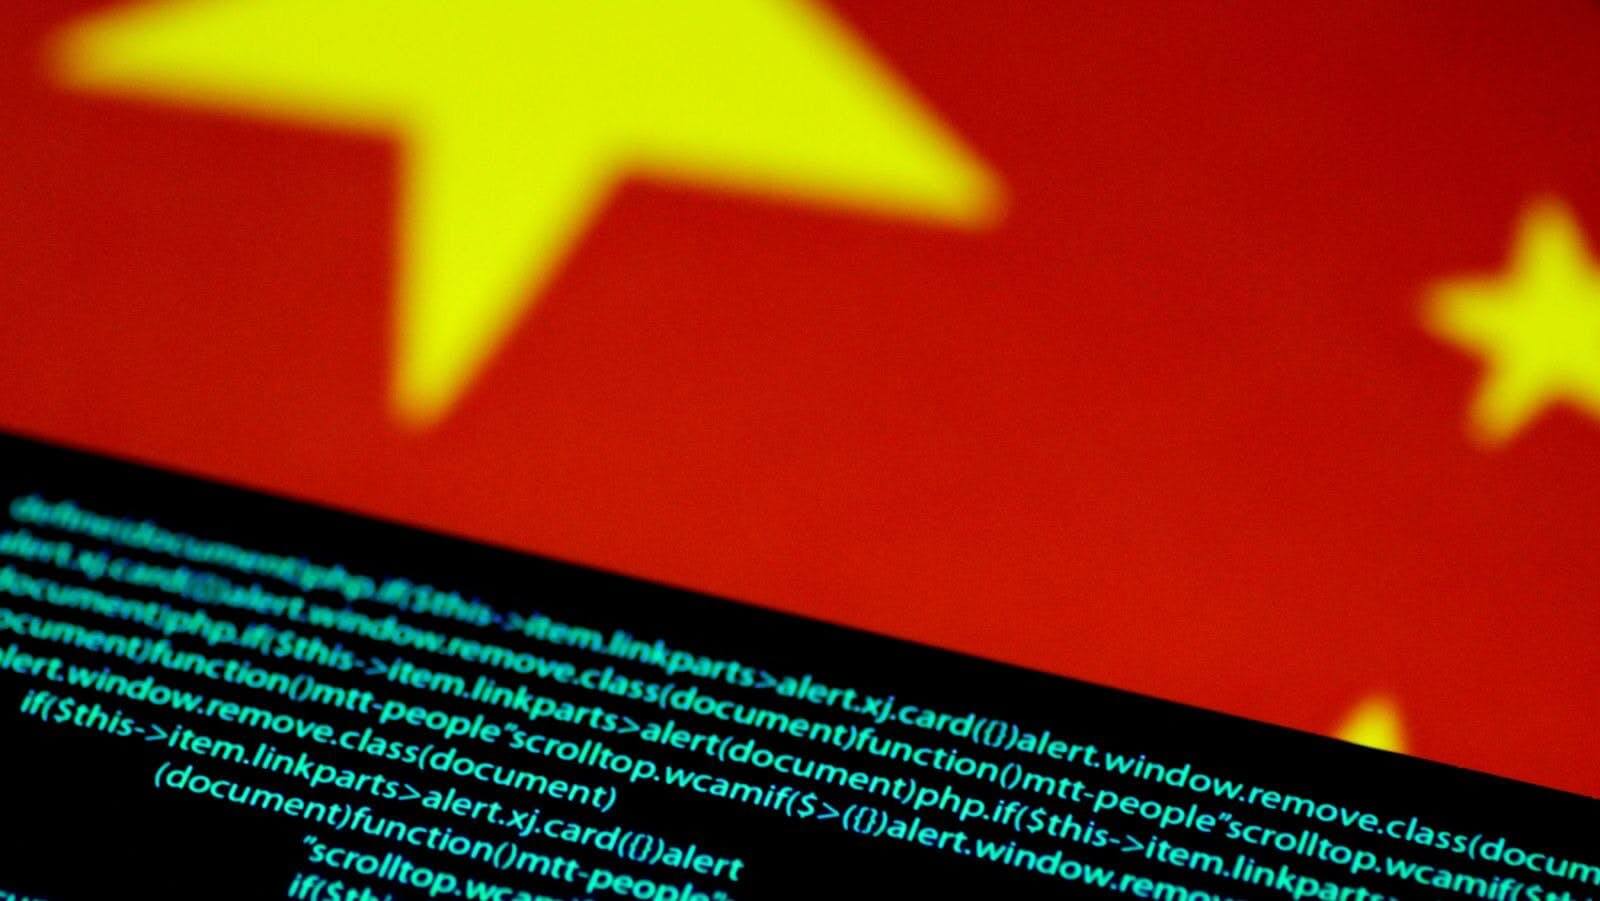 #MeToo activists in China are turning to the blockchain to dodge censorship